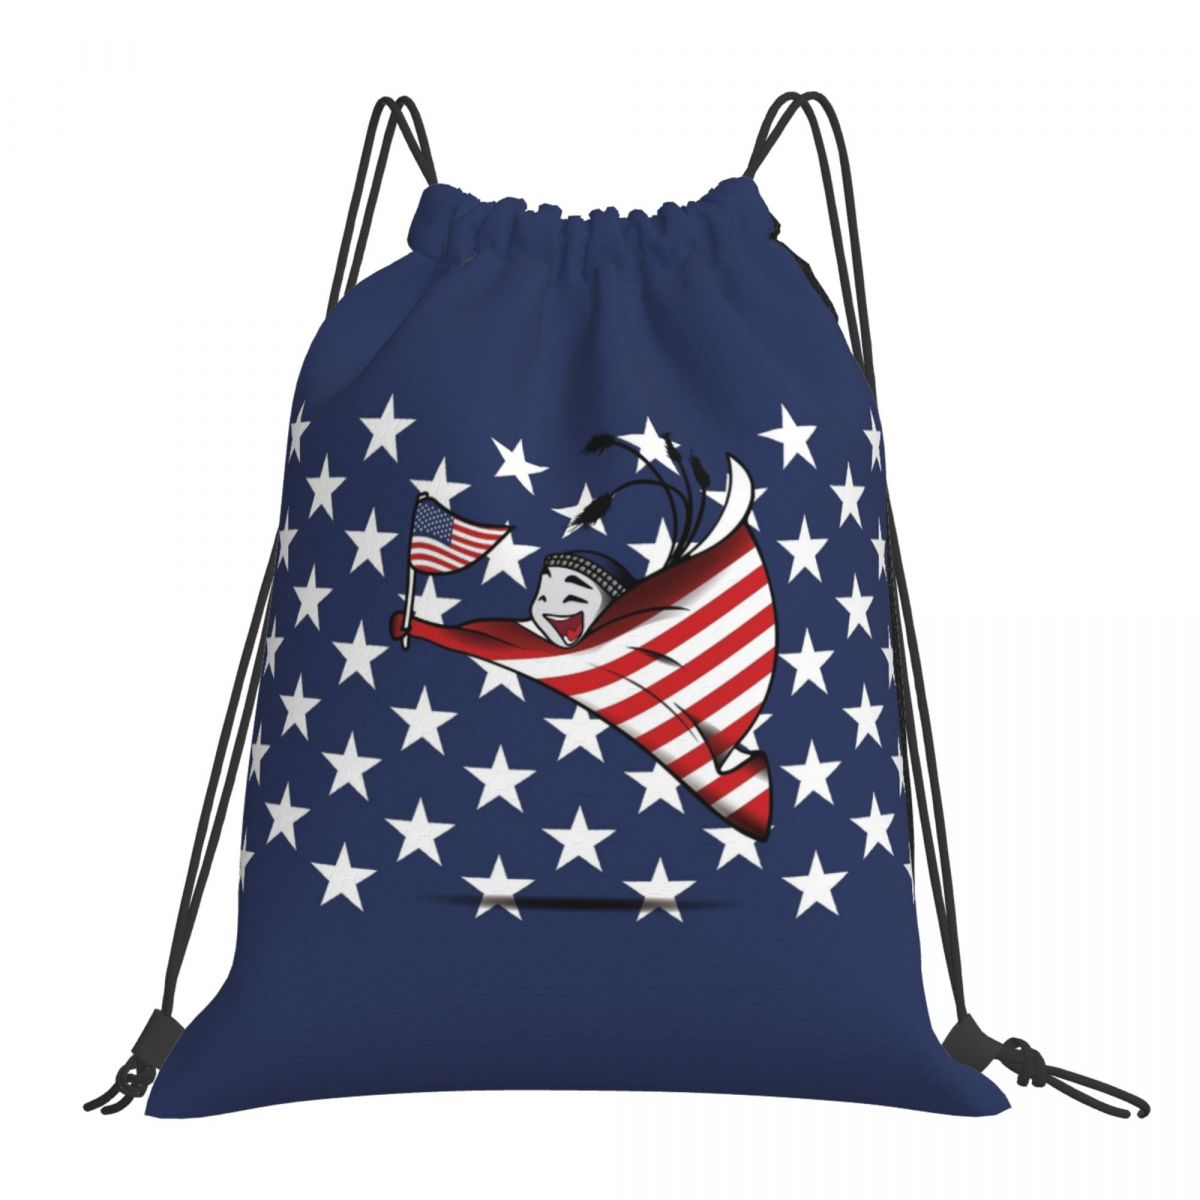 United States World Cup 2022 Mascot Drawstring Bags for School Gym